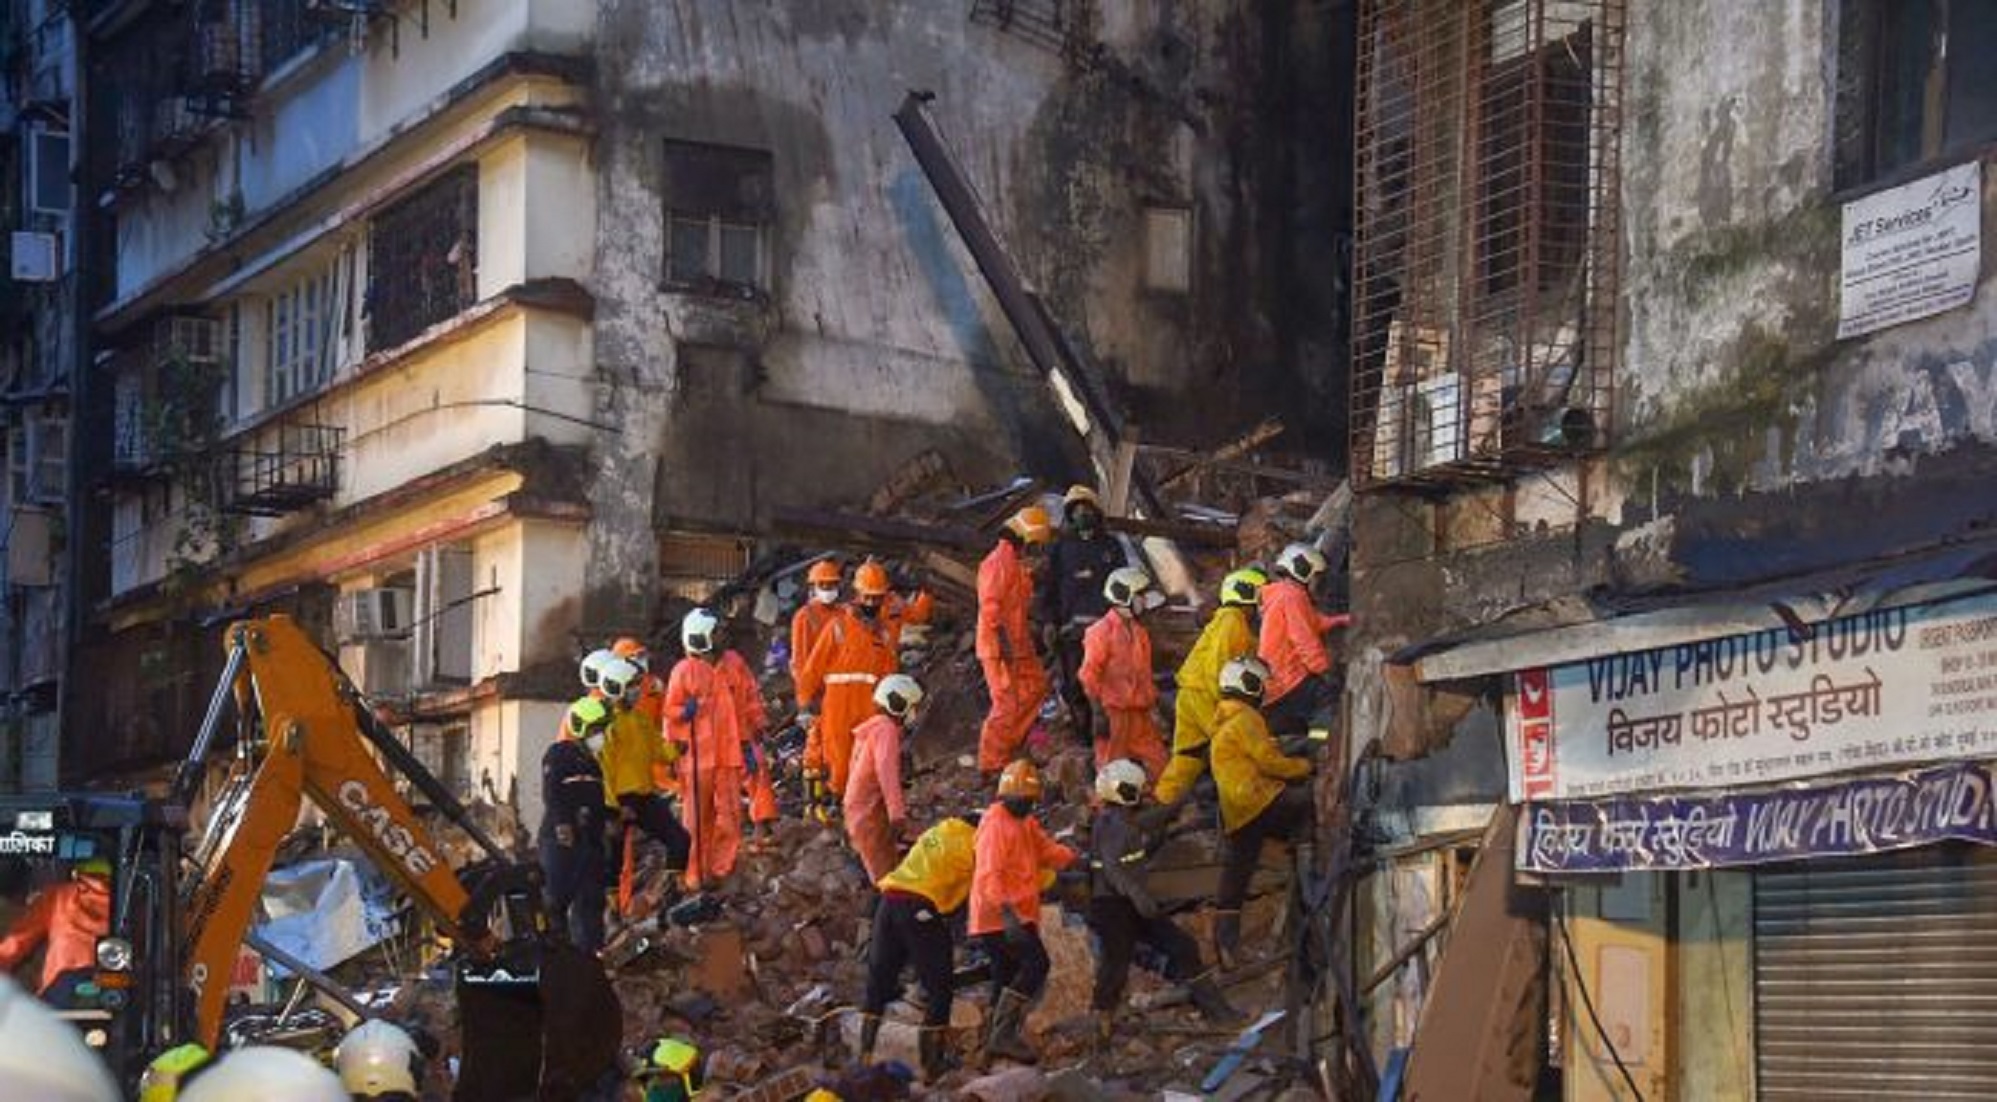 Three killed, seven injured after house collapses in India’s Mumbai